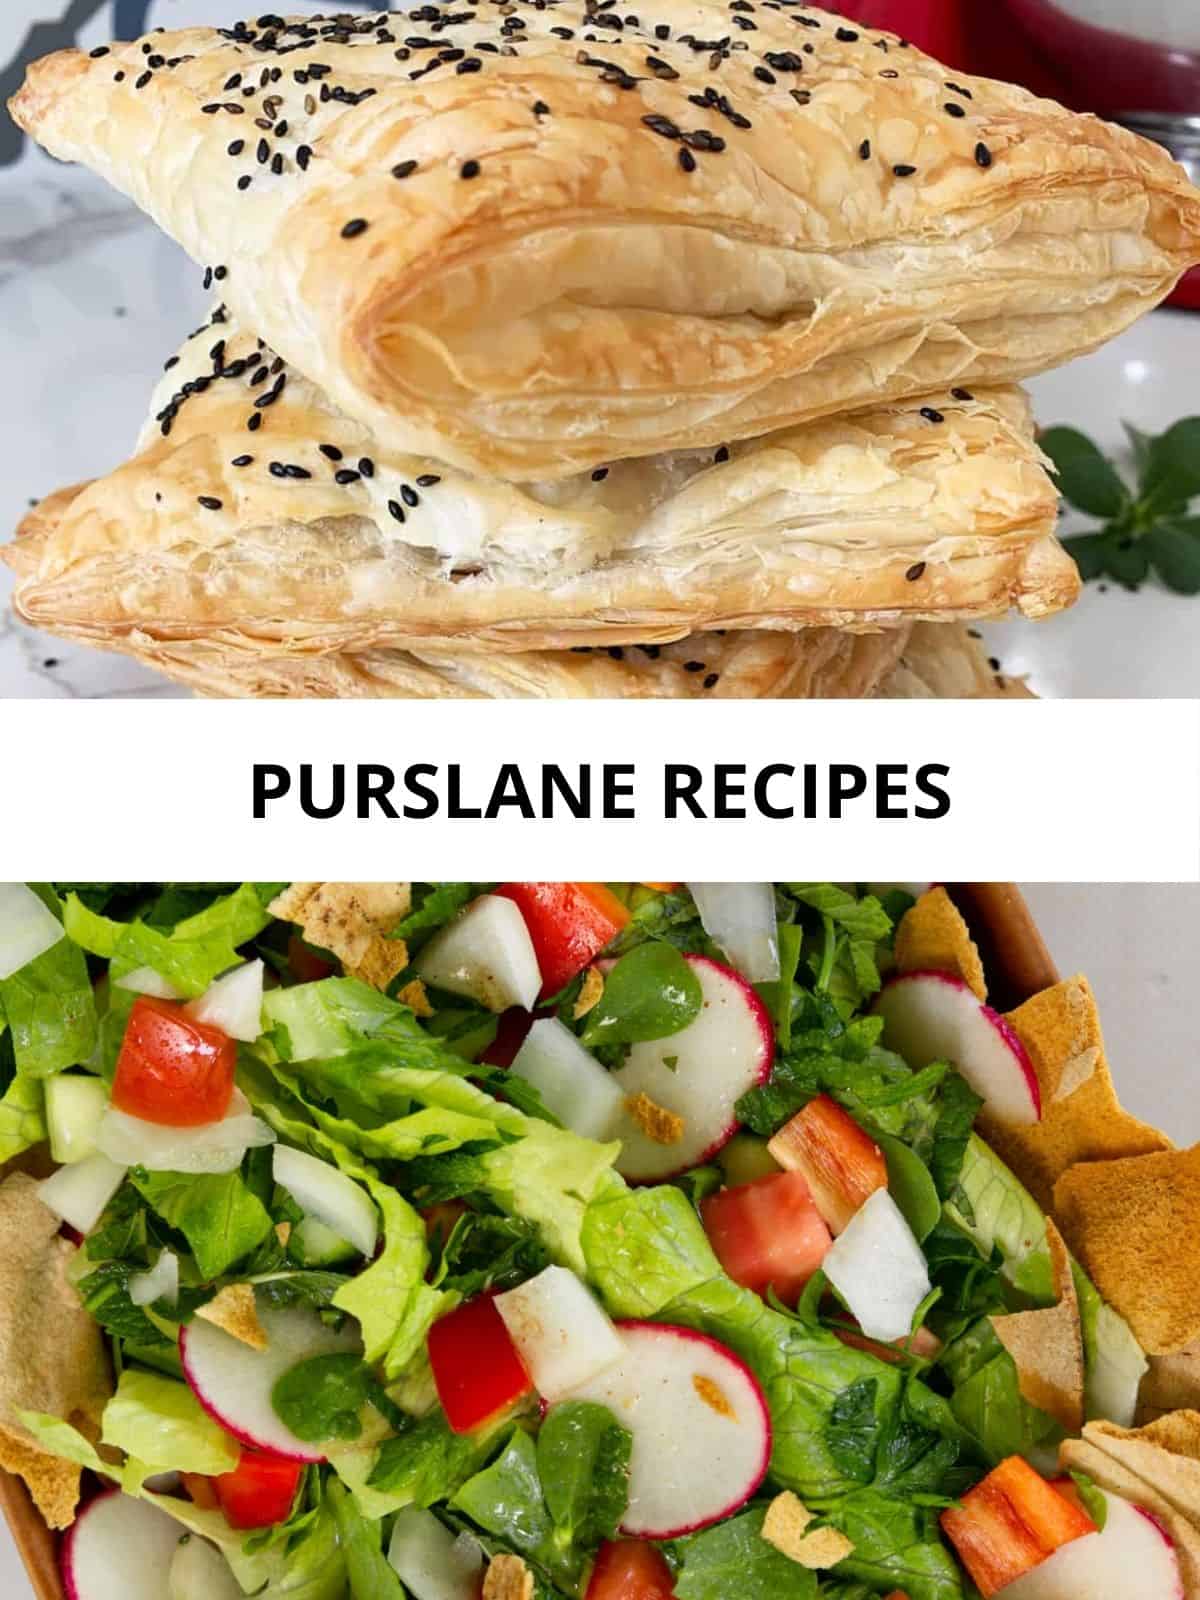 a collage of a salad and pastries